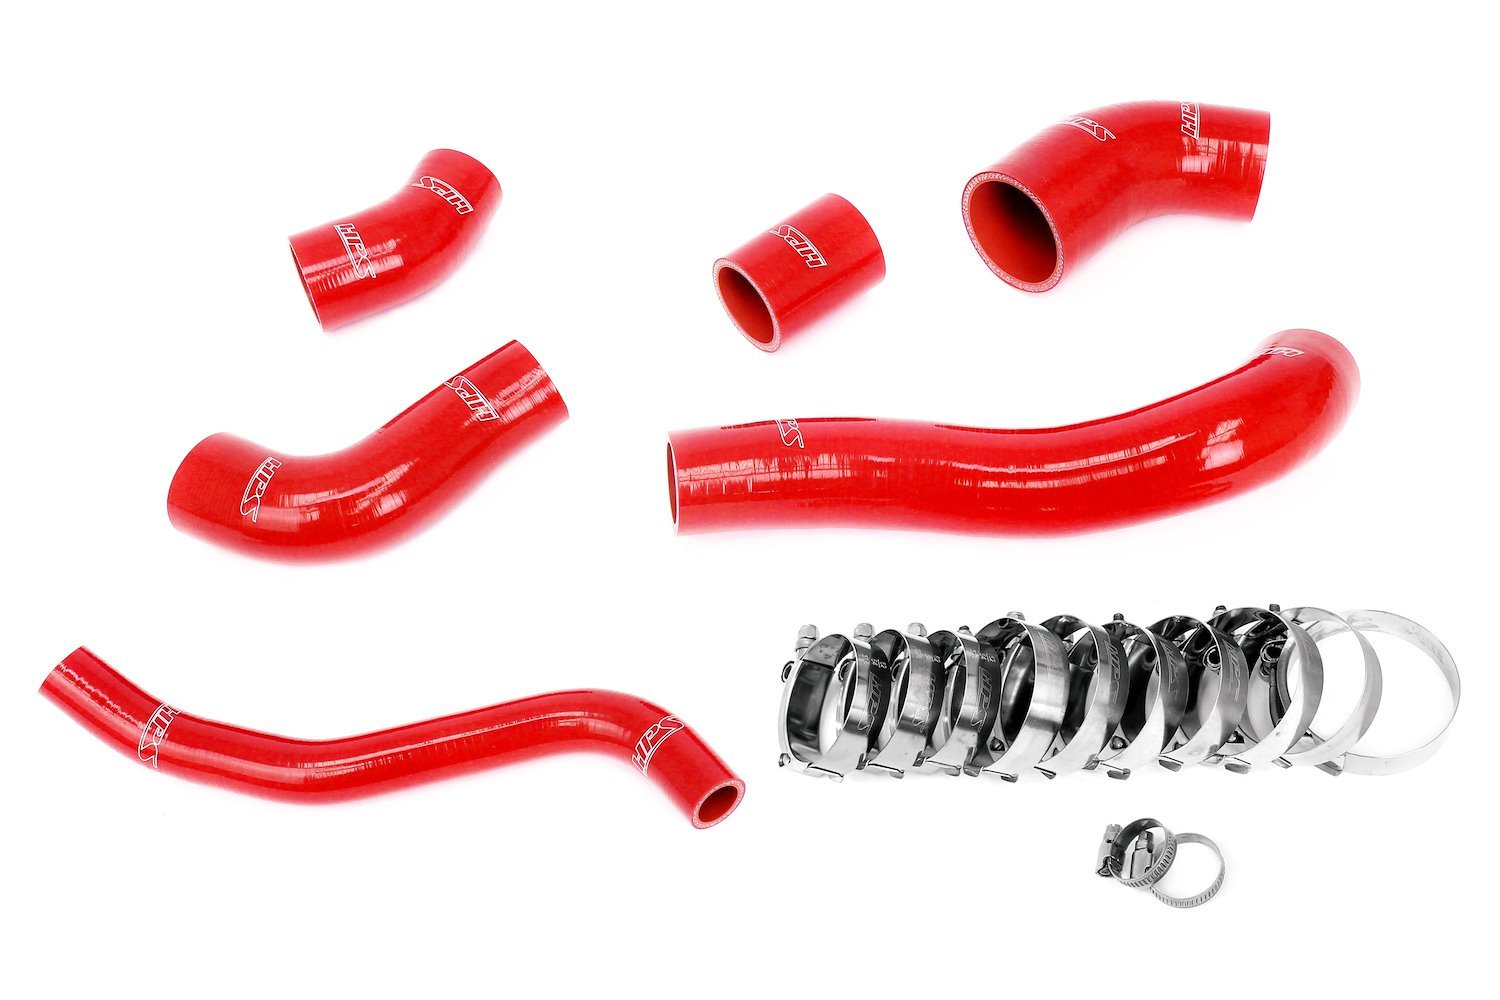 57-2003-RED Intercooler Hose Kit, 4-Ply Reinforced Silicone, Replaces Rubber Intercooler Hoses